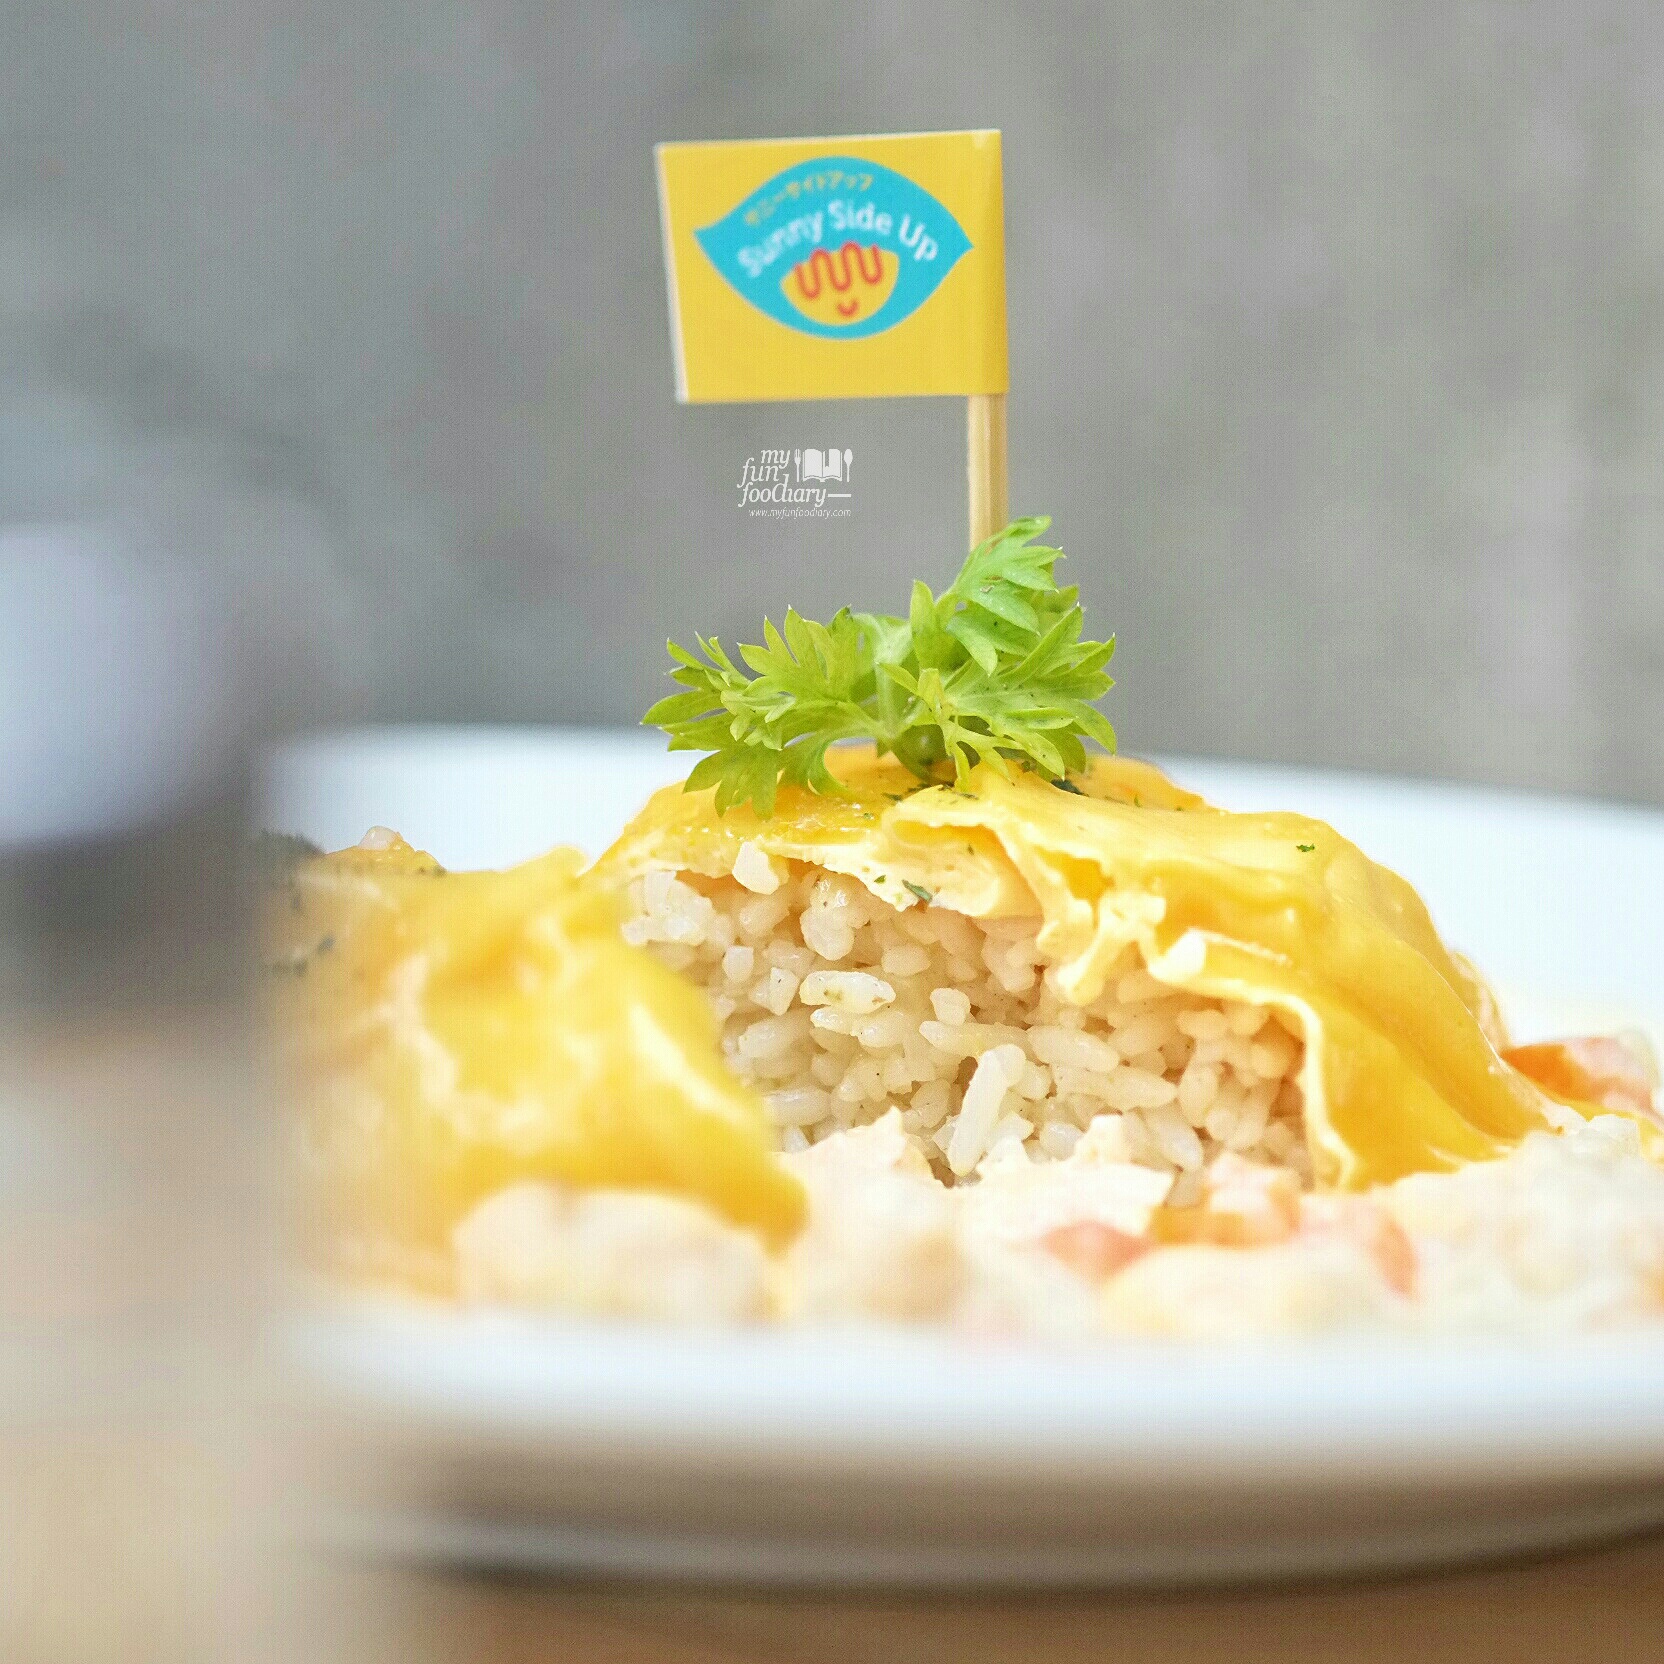 Creamy Salmon Omurice at Sunny Side Up by Myfunfoodiary 01